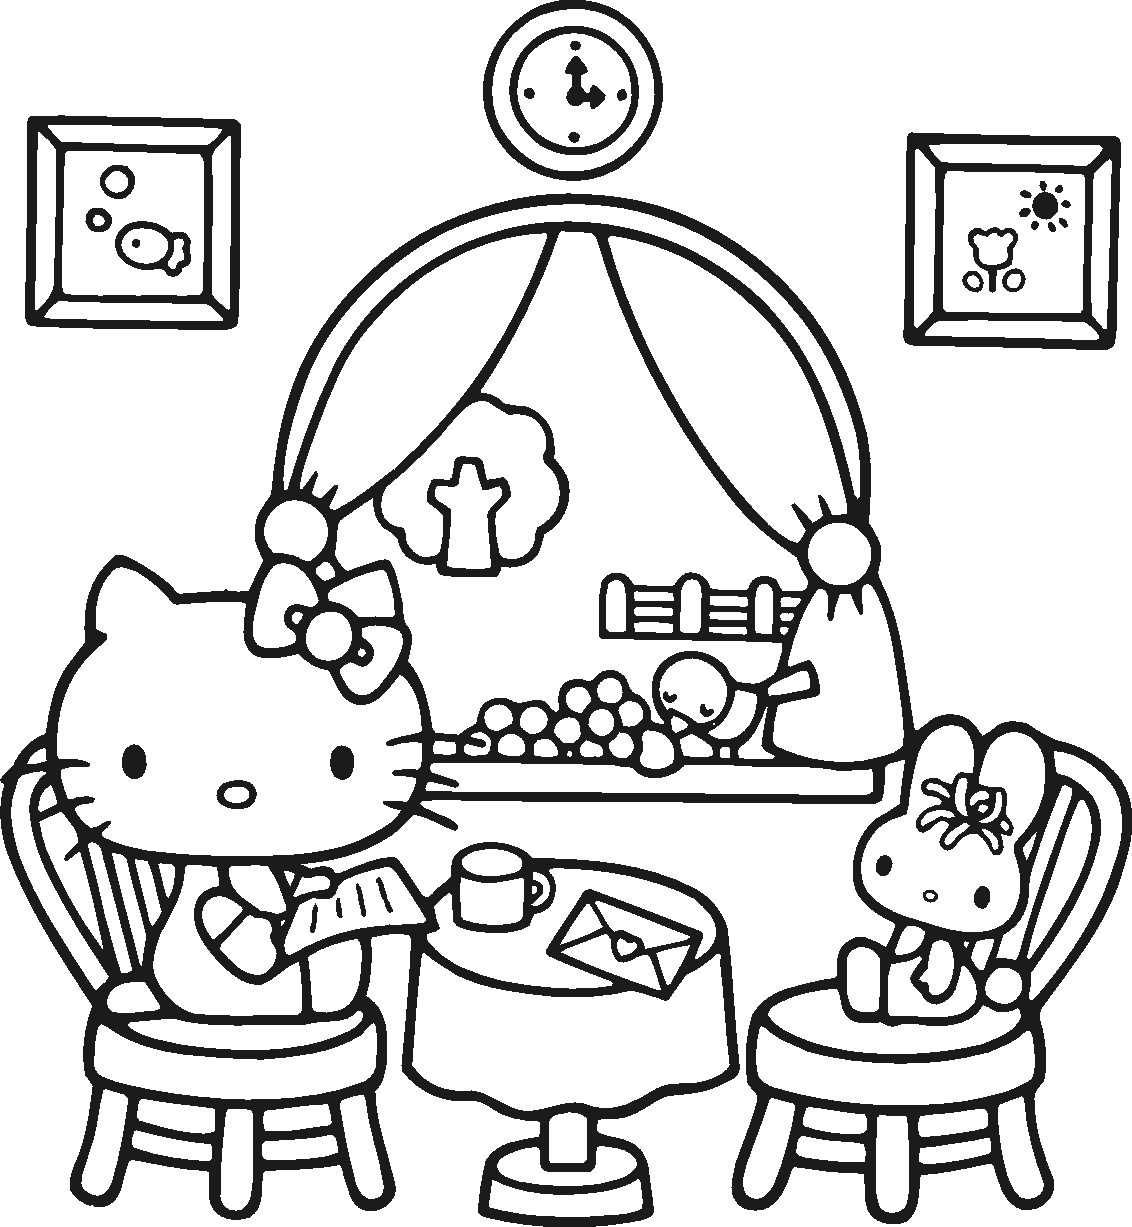 coloring pages of hello kitty hello kitty coloring pages of kitty pages coloring hello 